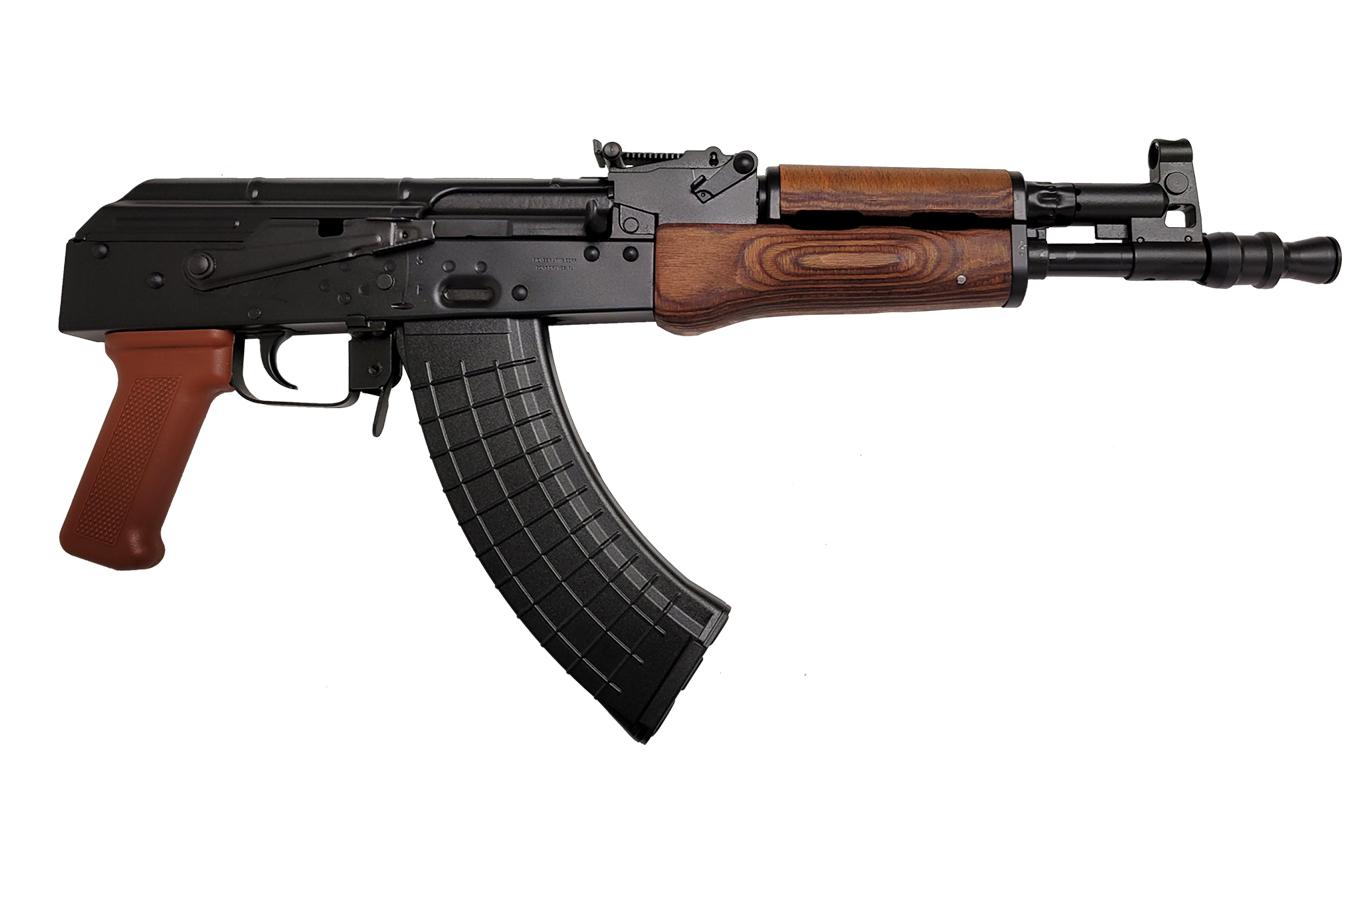 No. 16 Best Selling: PIONEER ARMS HELLPUP 7.62X39MM SEMI-AUTOMATIC AK PISTOL WITH ORIGINAL POLISH LAMINATED WOOD F